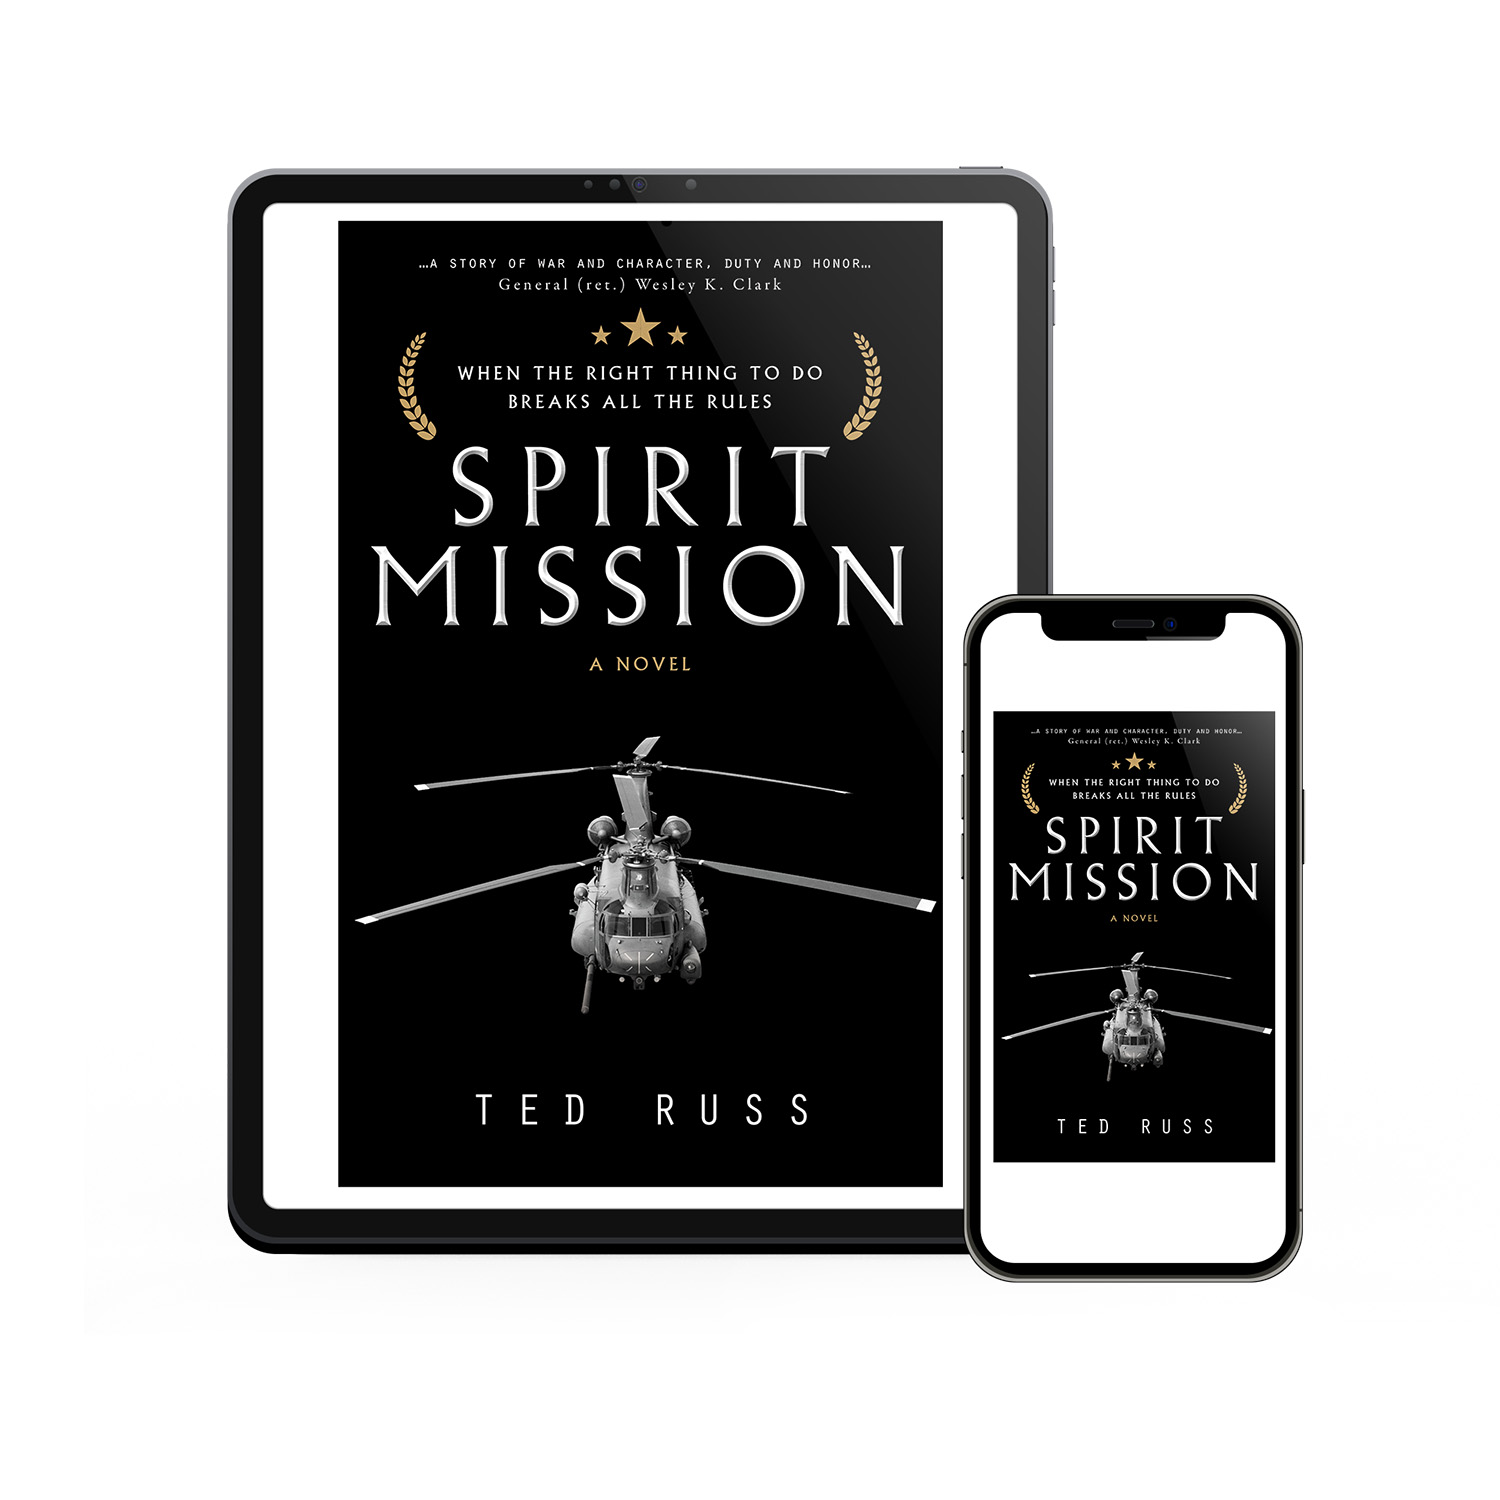 'Spirit Mission' is a thoughtful novel examining what it means to be a serving officer in the US Forces. The author is Ted Russ. The book cover and interior formatting are designed by Mark Thomas of coverness.com. To find out more about my book design services, please visit www.coverness.com